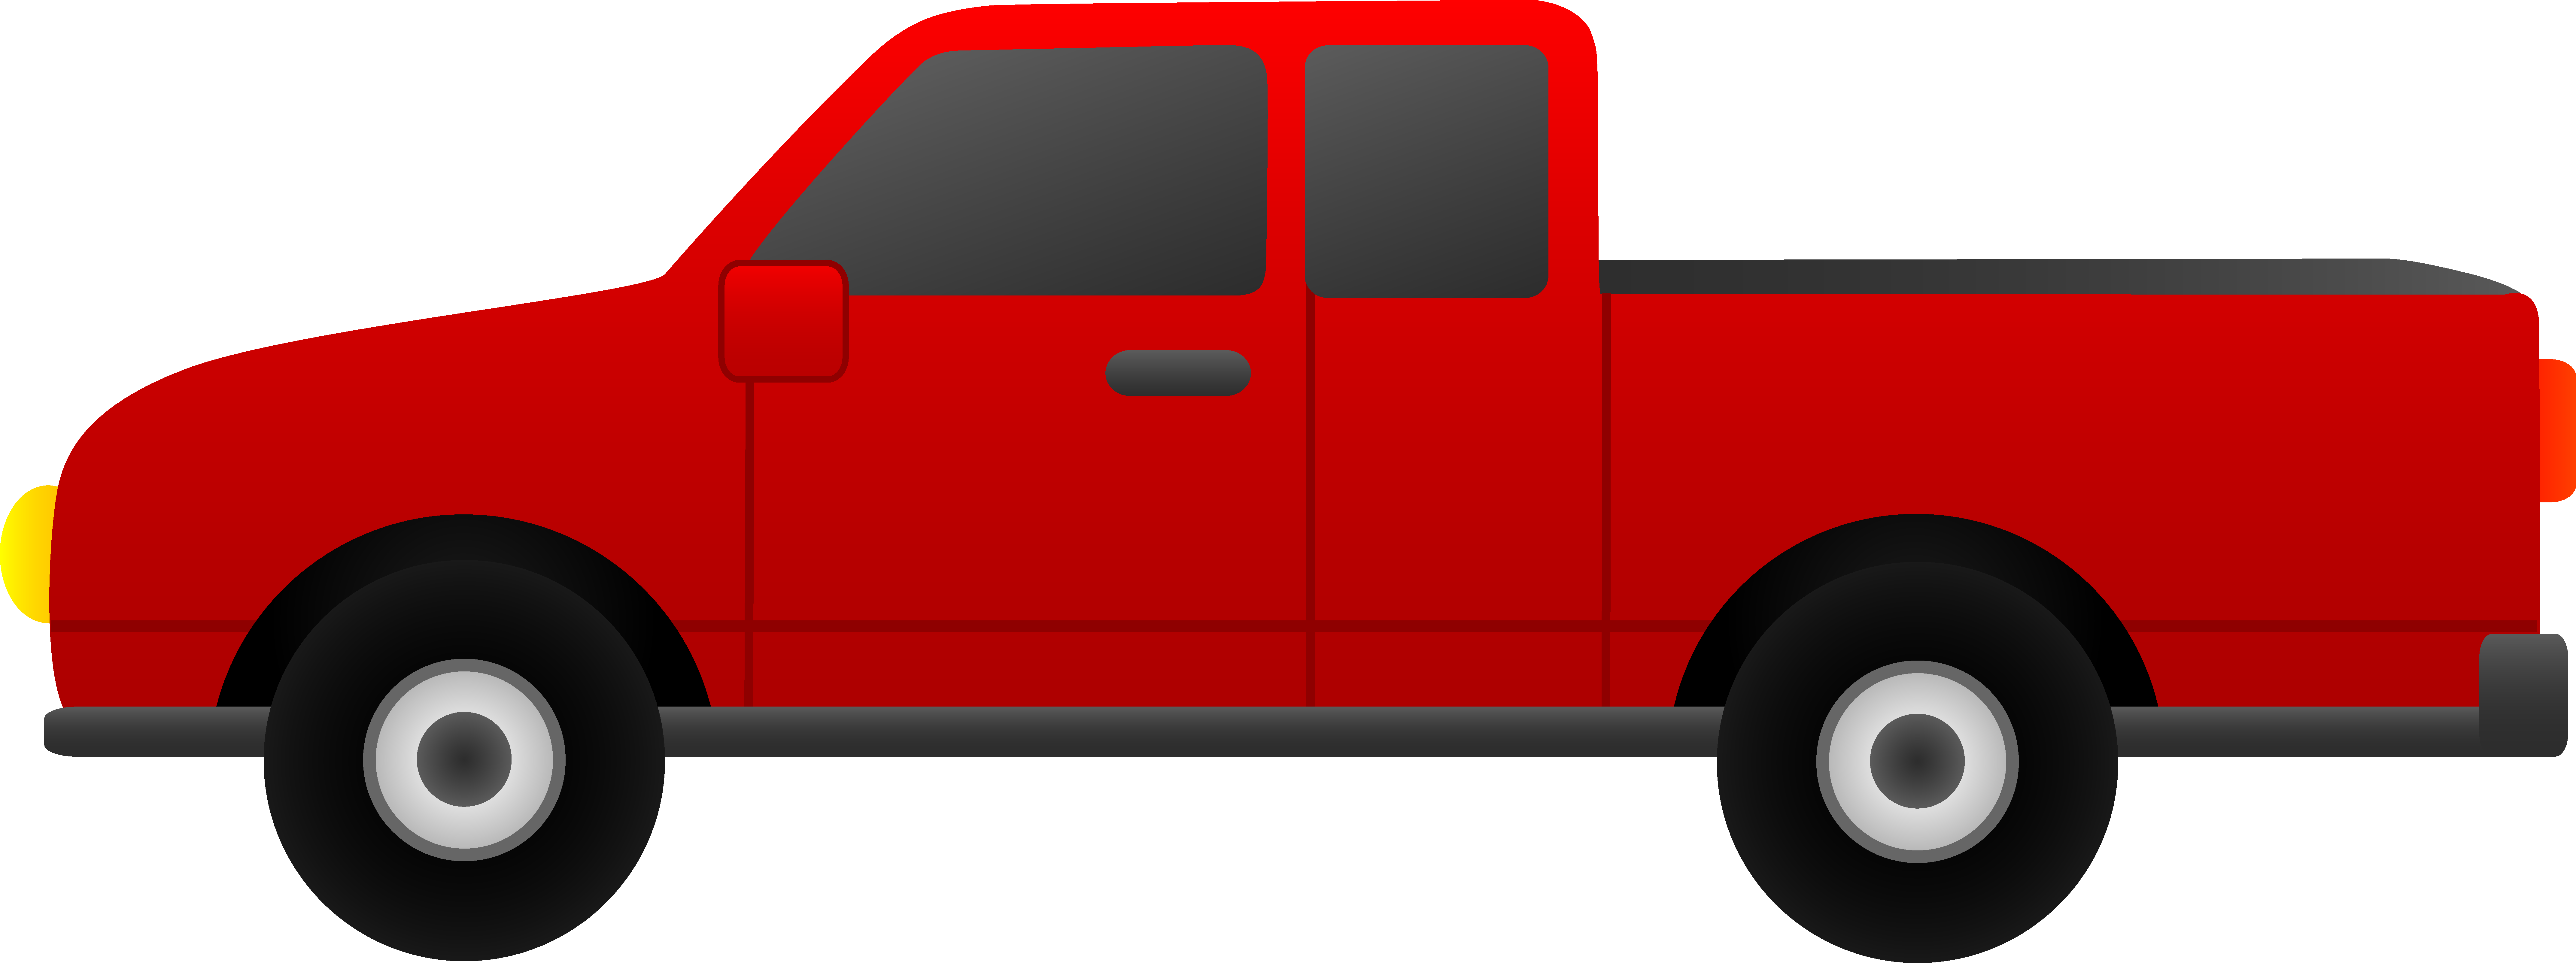 free black and white truck clipart - photo #12